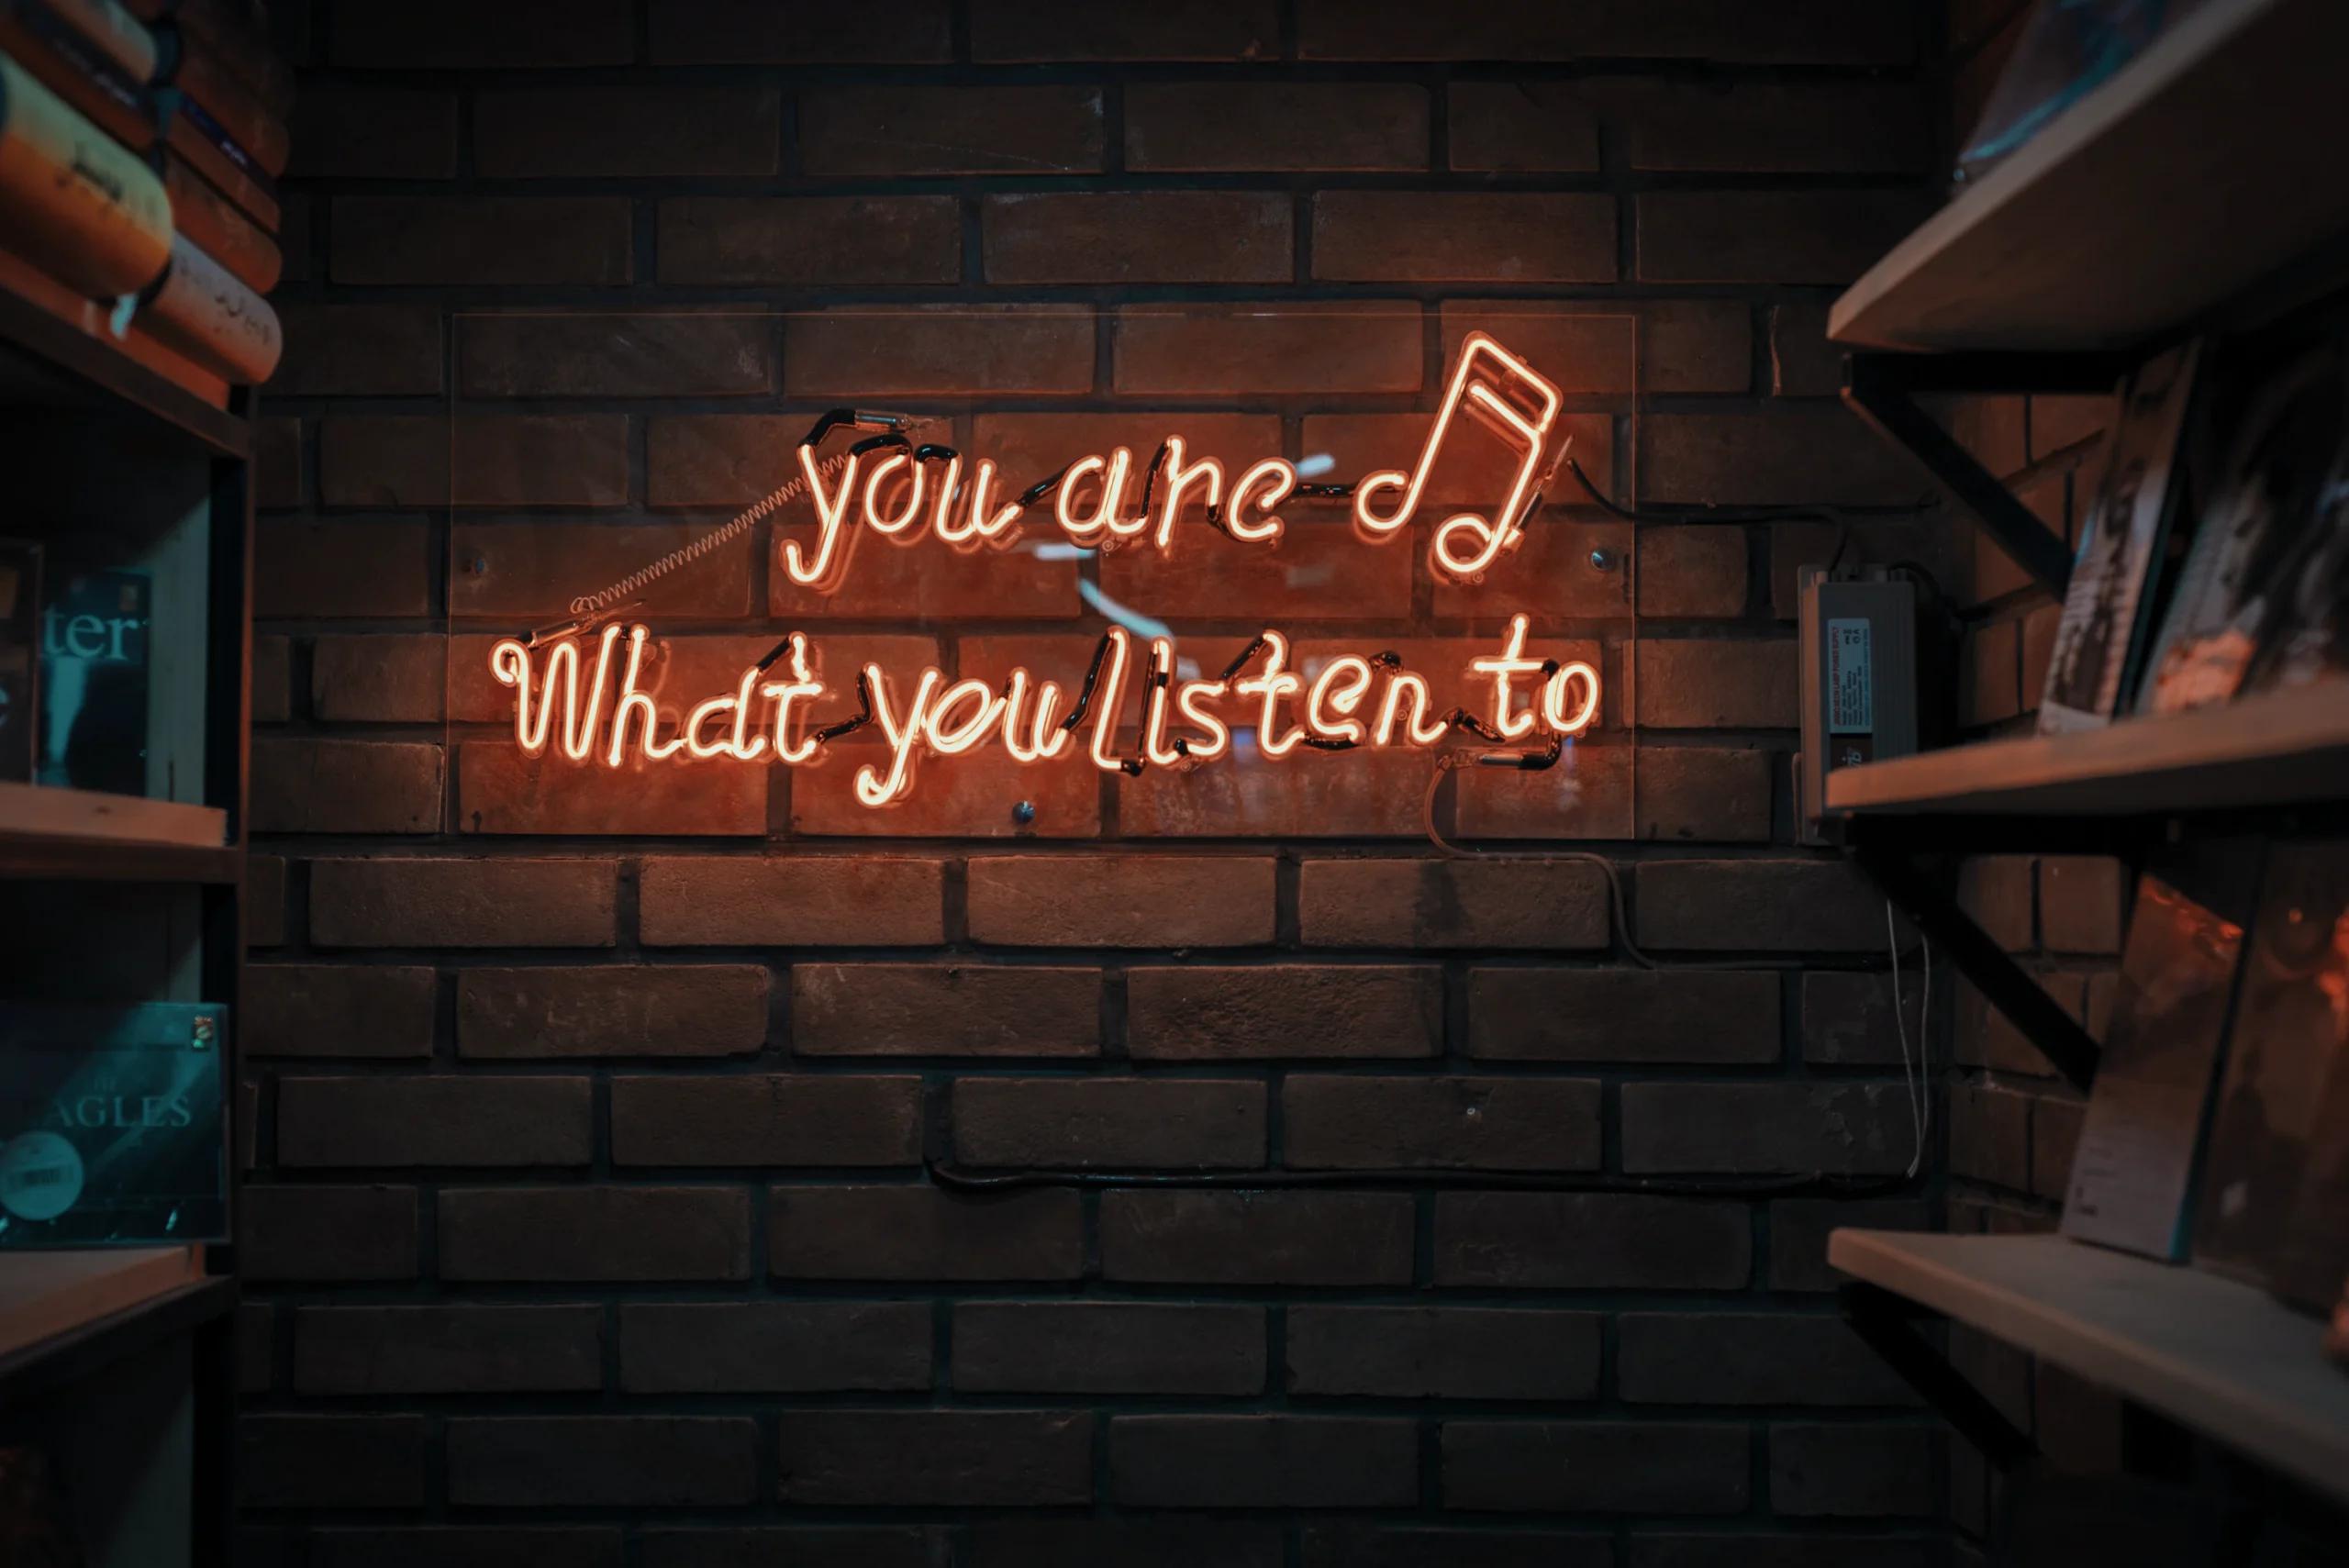 A sign that sees "you are what you listen to"